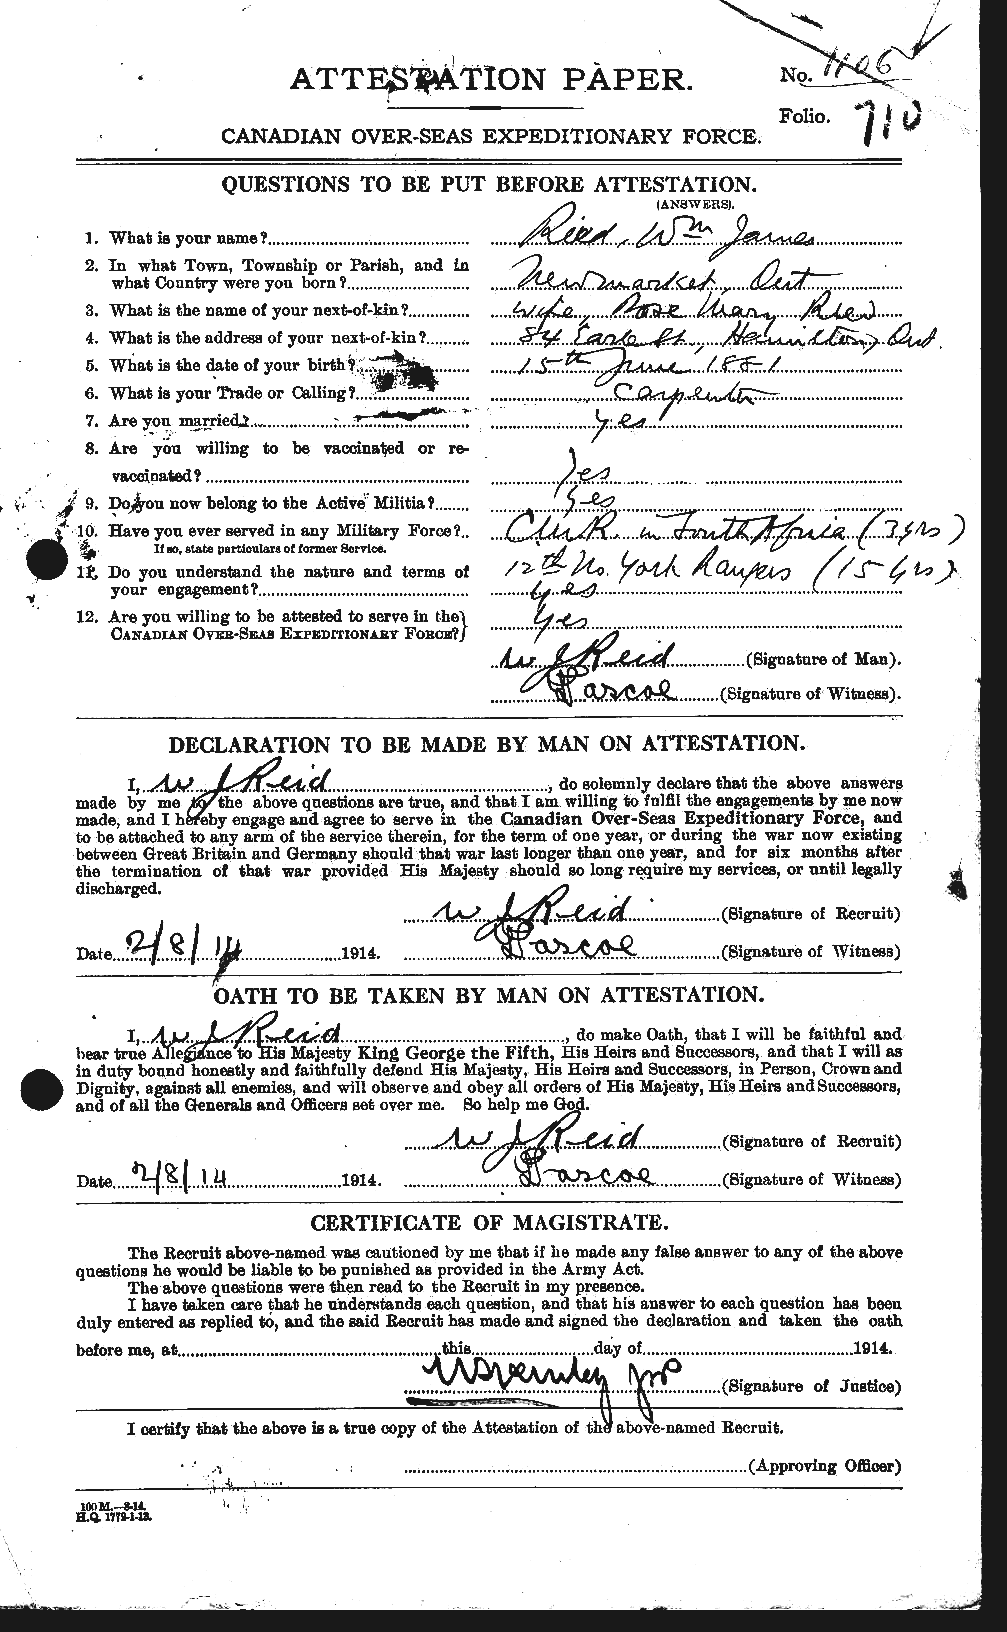 Personnel Records of the First World War - CEF 597004a